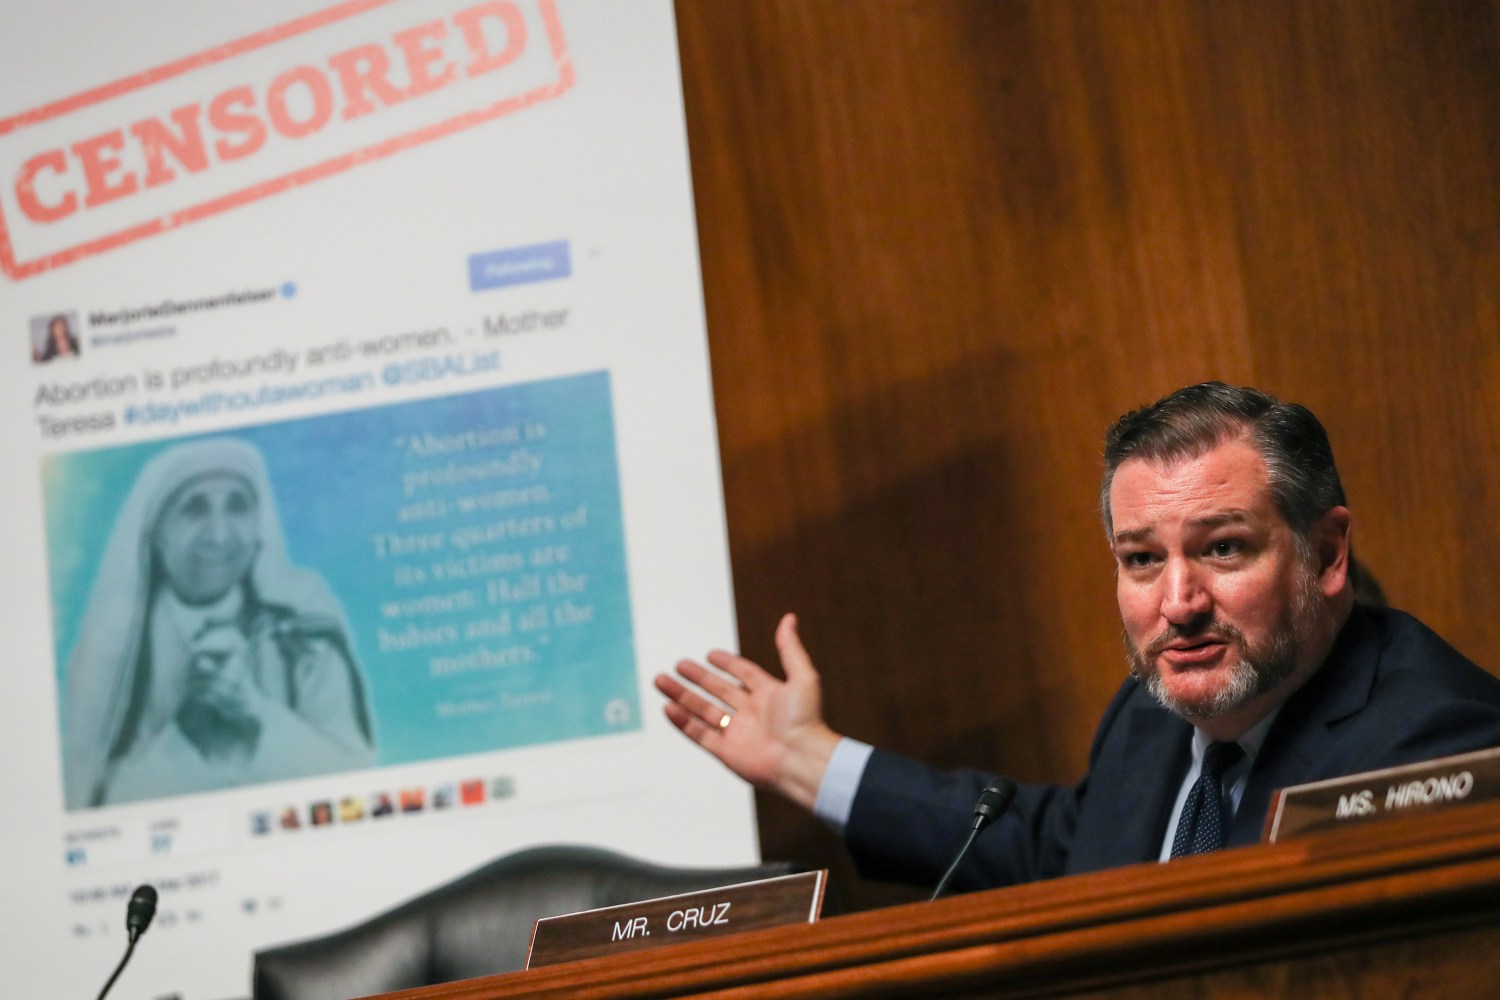 Sen. Ted Cruz gestures at a poster of a Facebook post depicting the Mother Teresa below a headline reading "CENSORED."